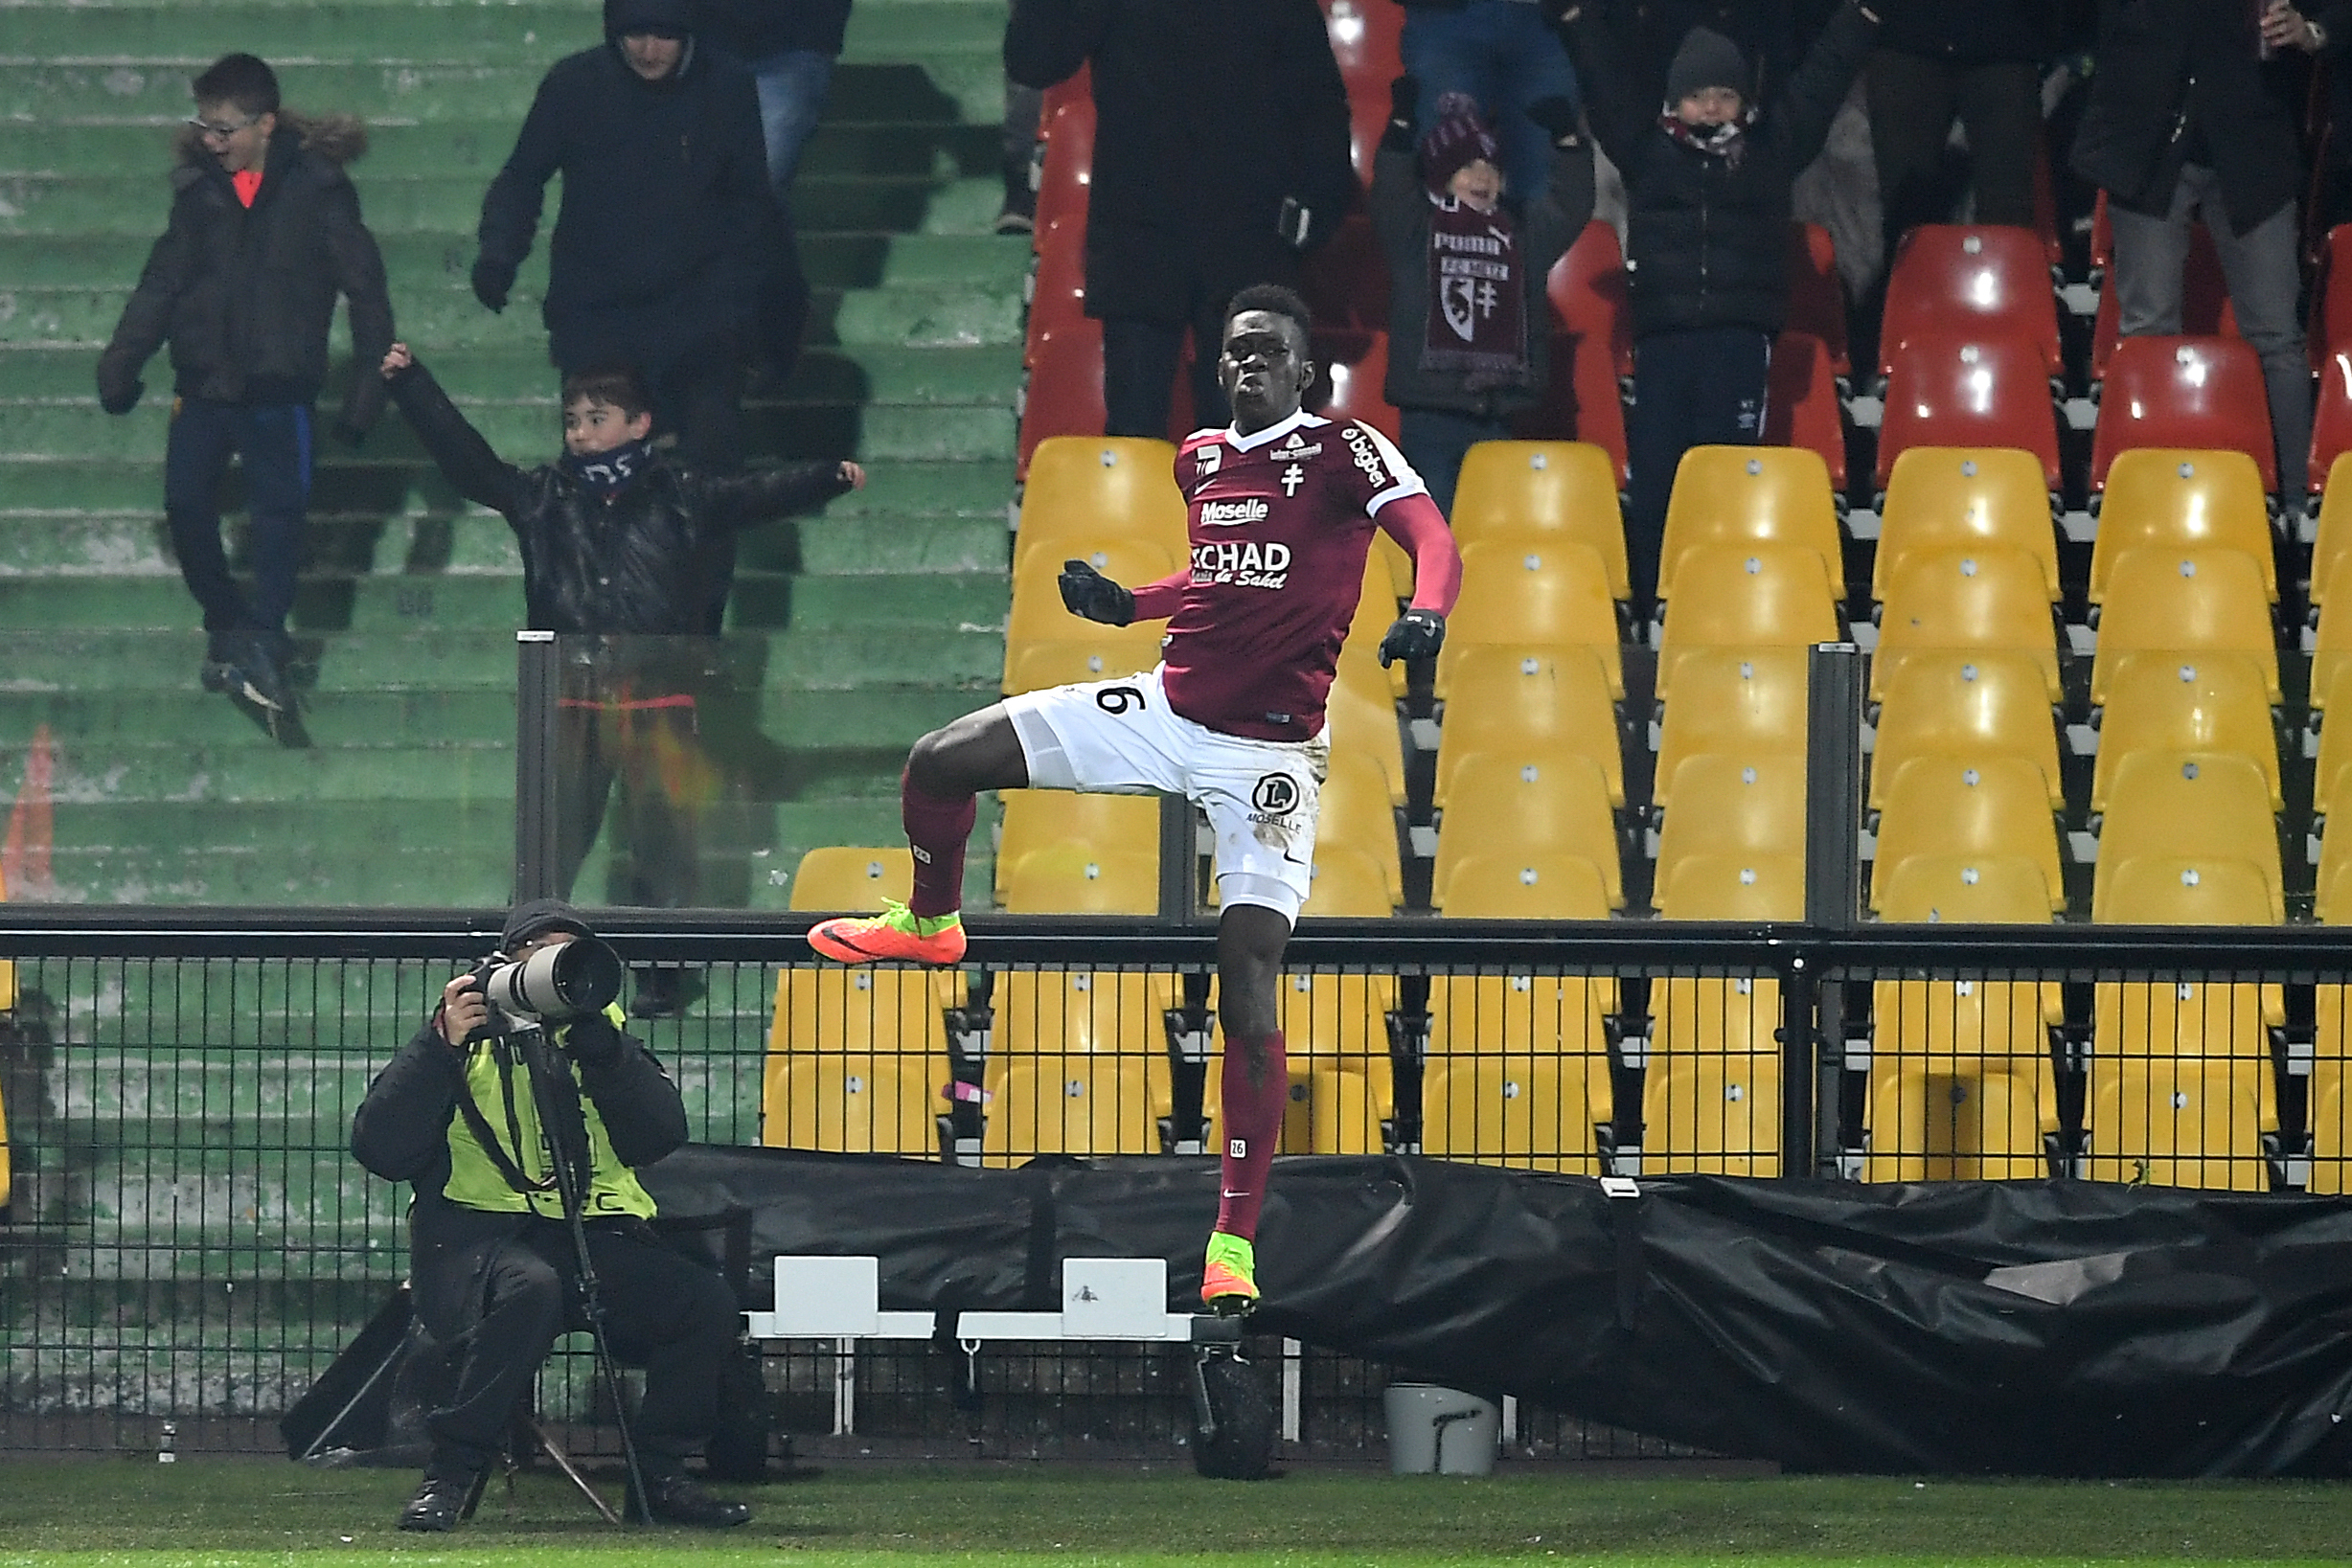 Metz's Senegalese midfielder Ismaila Sarr celebrates after scoring a goal during the French L1 football match between Metz (FCM) and Dijon FCO at the Saint Symphorien stadium on February 8, 2017 in Longeville-Les-Metz, eastern France. / AFP / PATRICK HERTZOG        (Photo credit should read PATRICK HERTZOG/AFP/Getty Images)